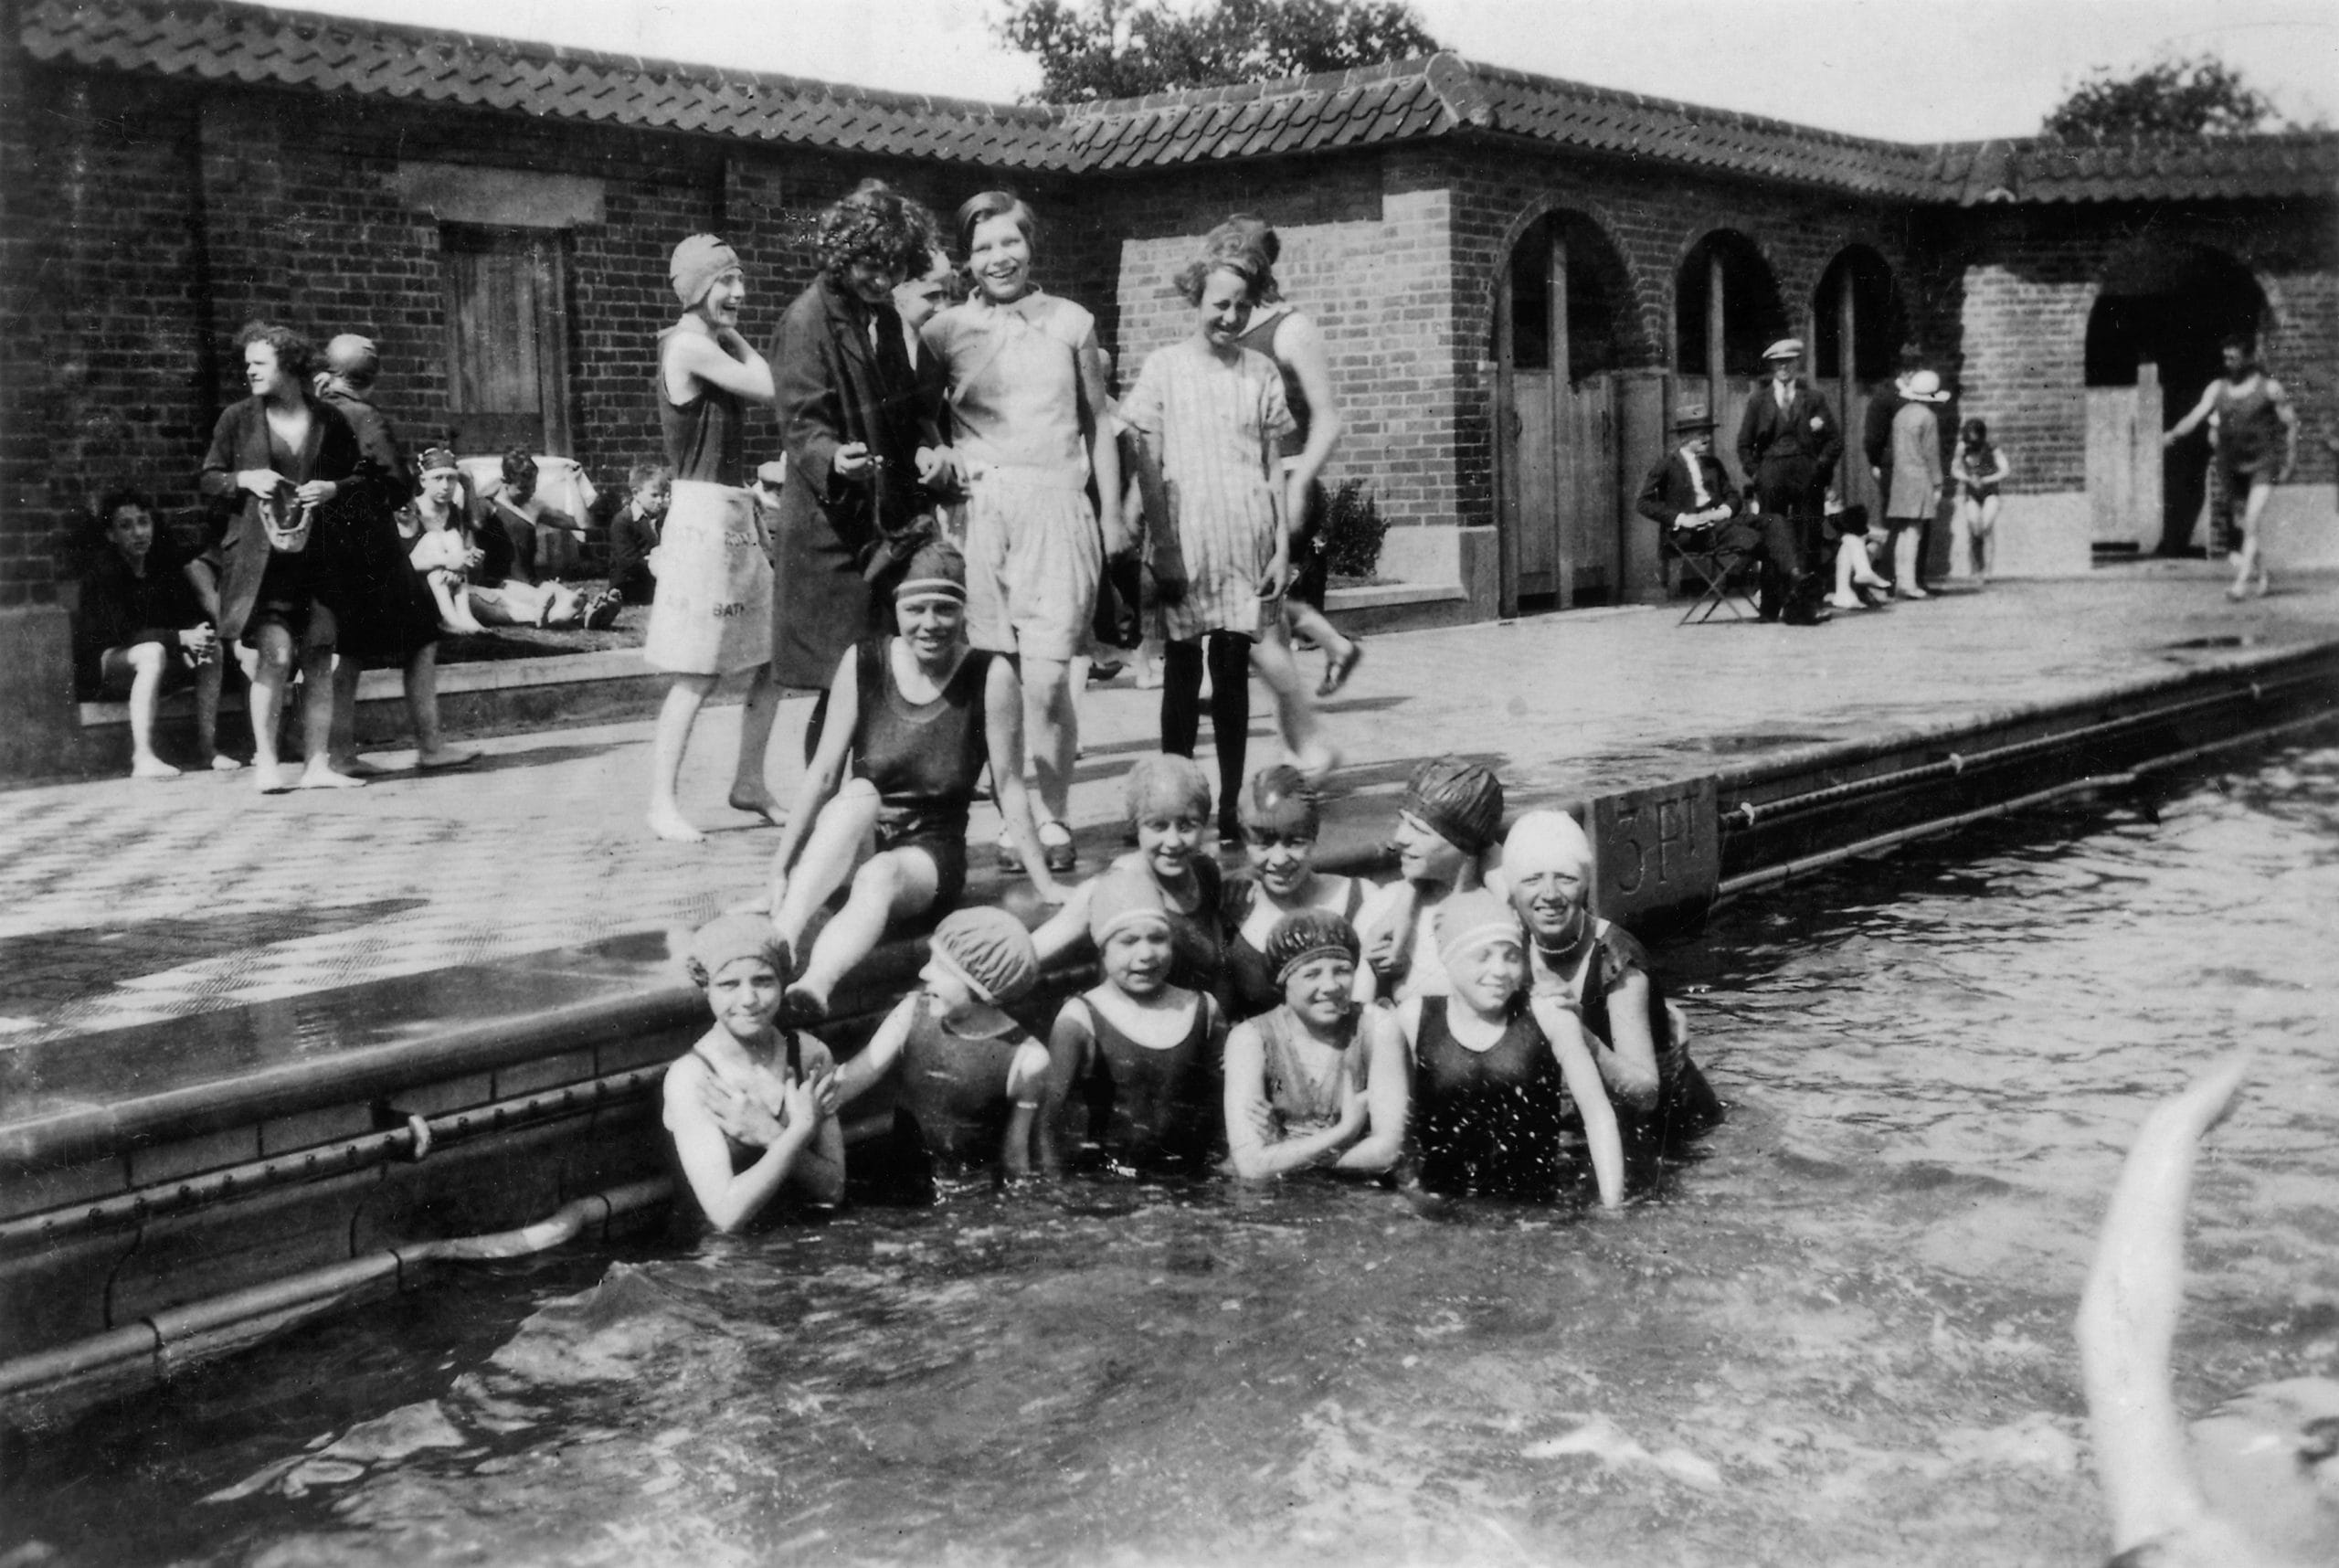 A black and white photo of a group of women swimming in an outdoor pool